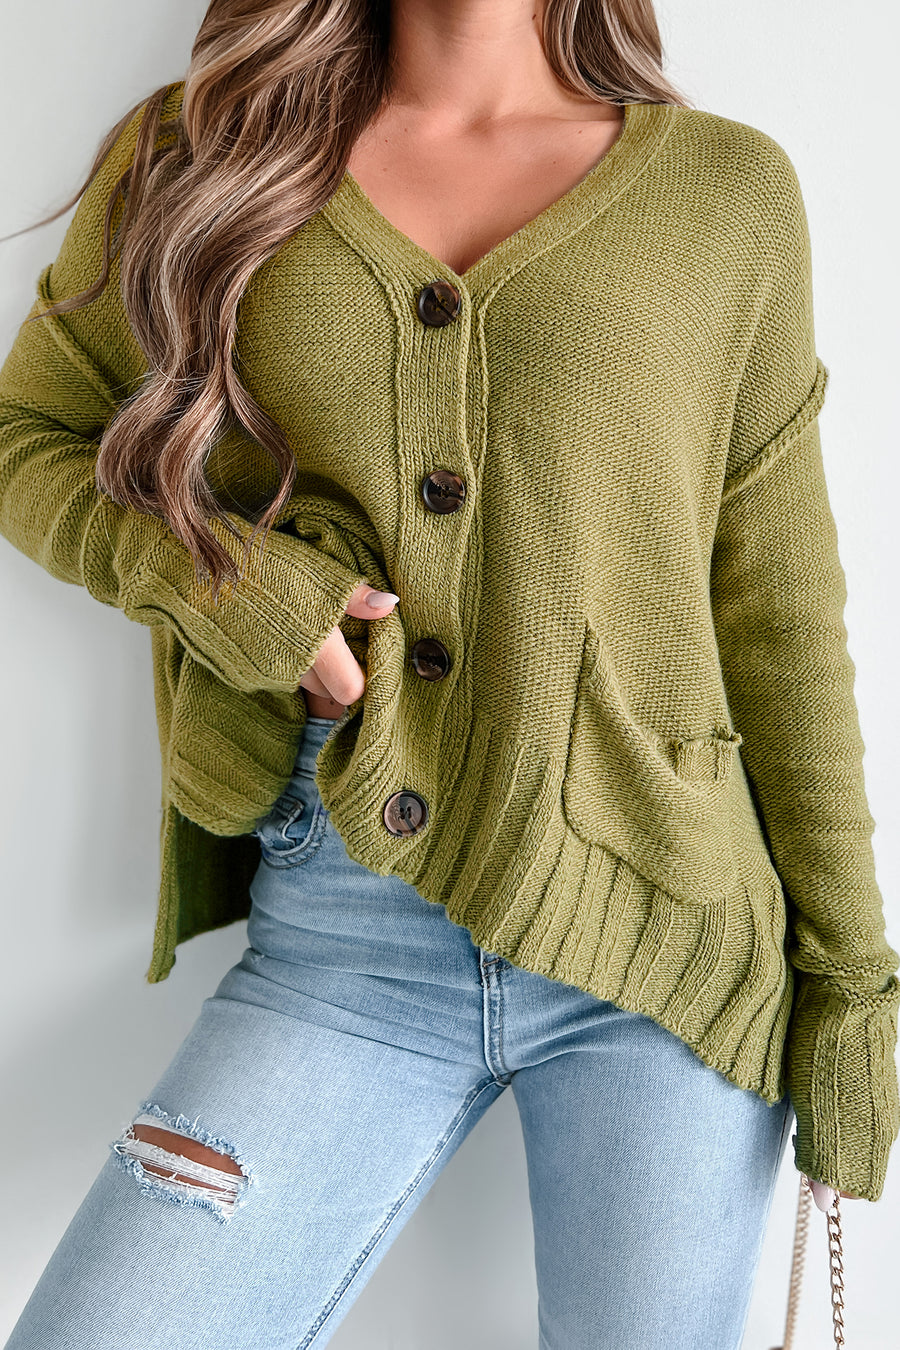 Say No More Button Front Sweater Cardigan (Light Olive) - NanaMacs